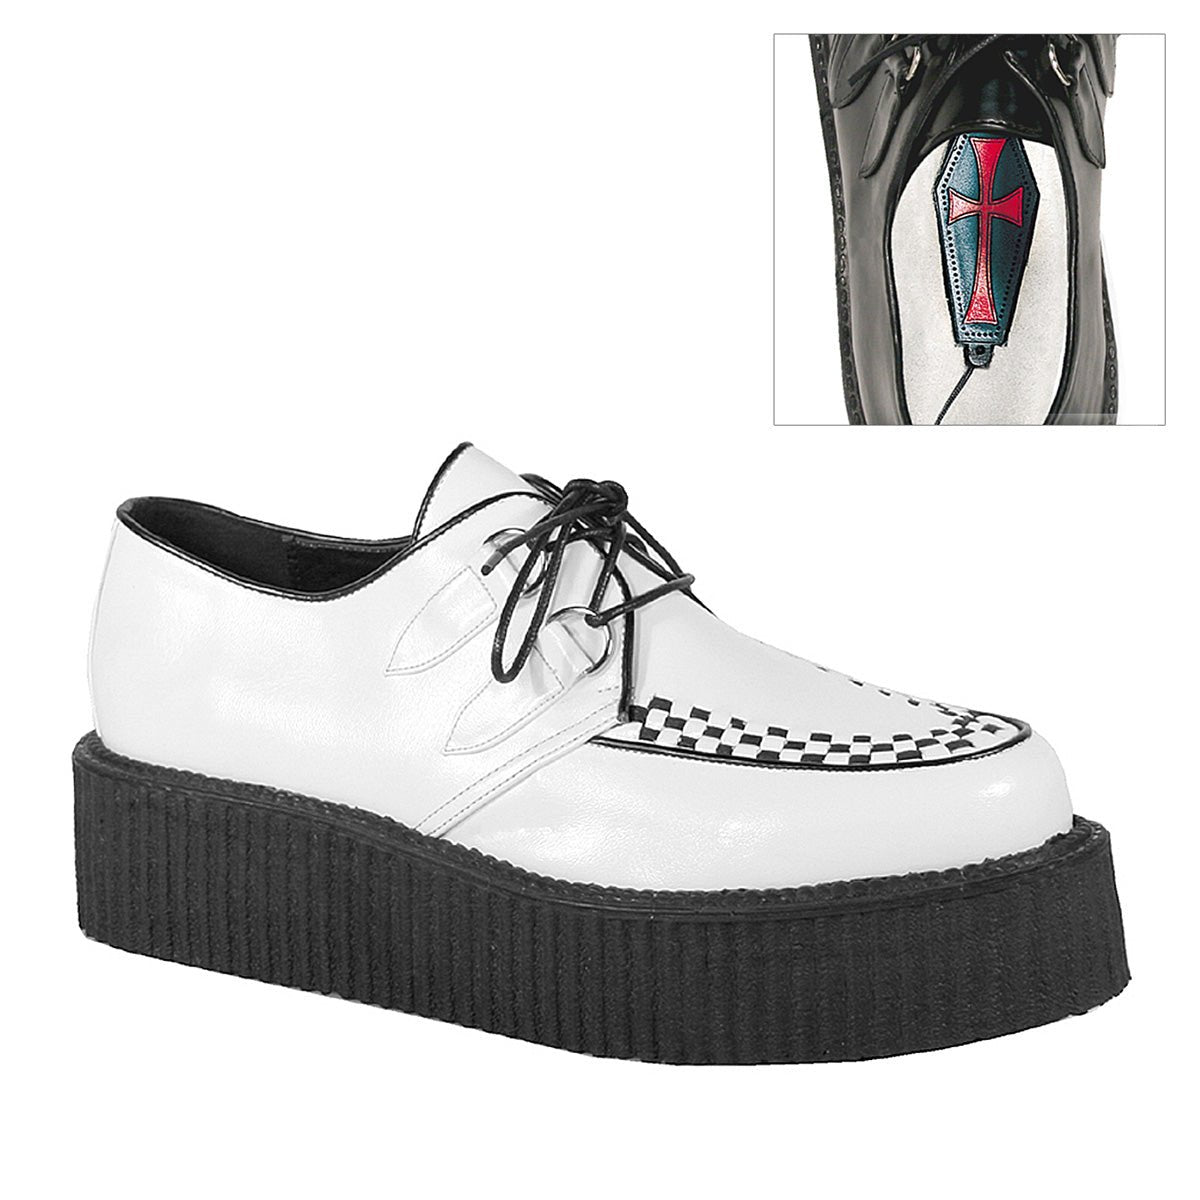 DemoniaCult V CREEPER 502 Creepers - From DemoniaCult Sold By Alternative Footwear